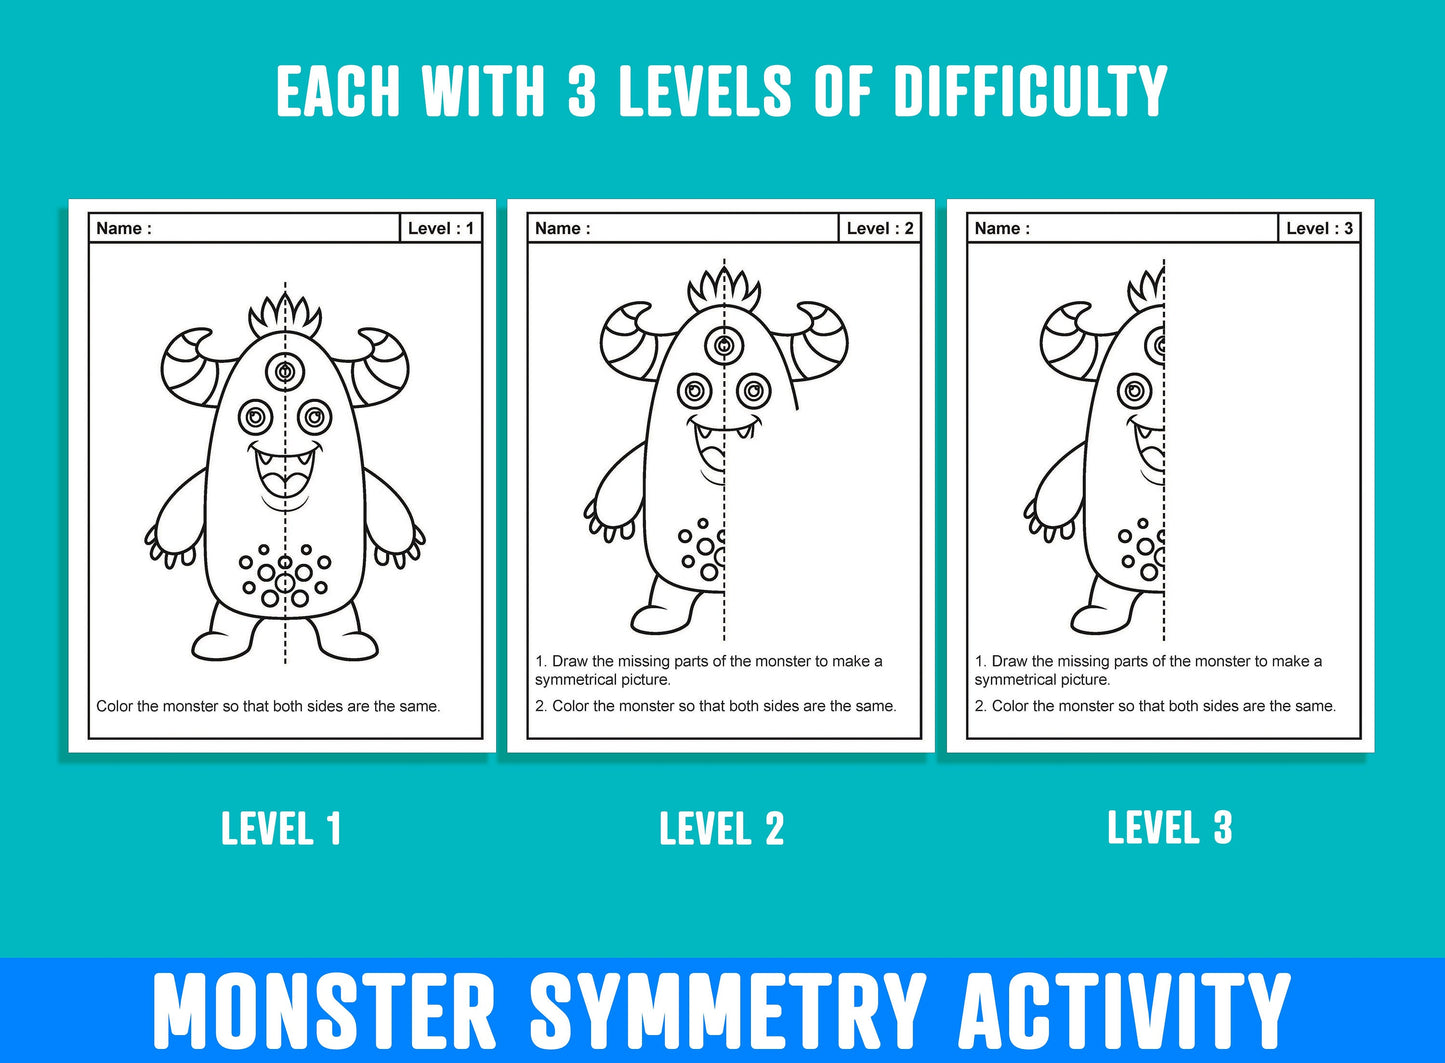 Monster Symmetry Worksheet, Monster Theme Lines of Symmetry Activity, 24 Pages, Includes 8 Designs, Each With 3 Levels of Difficulty